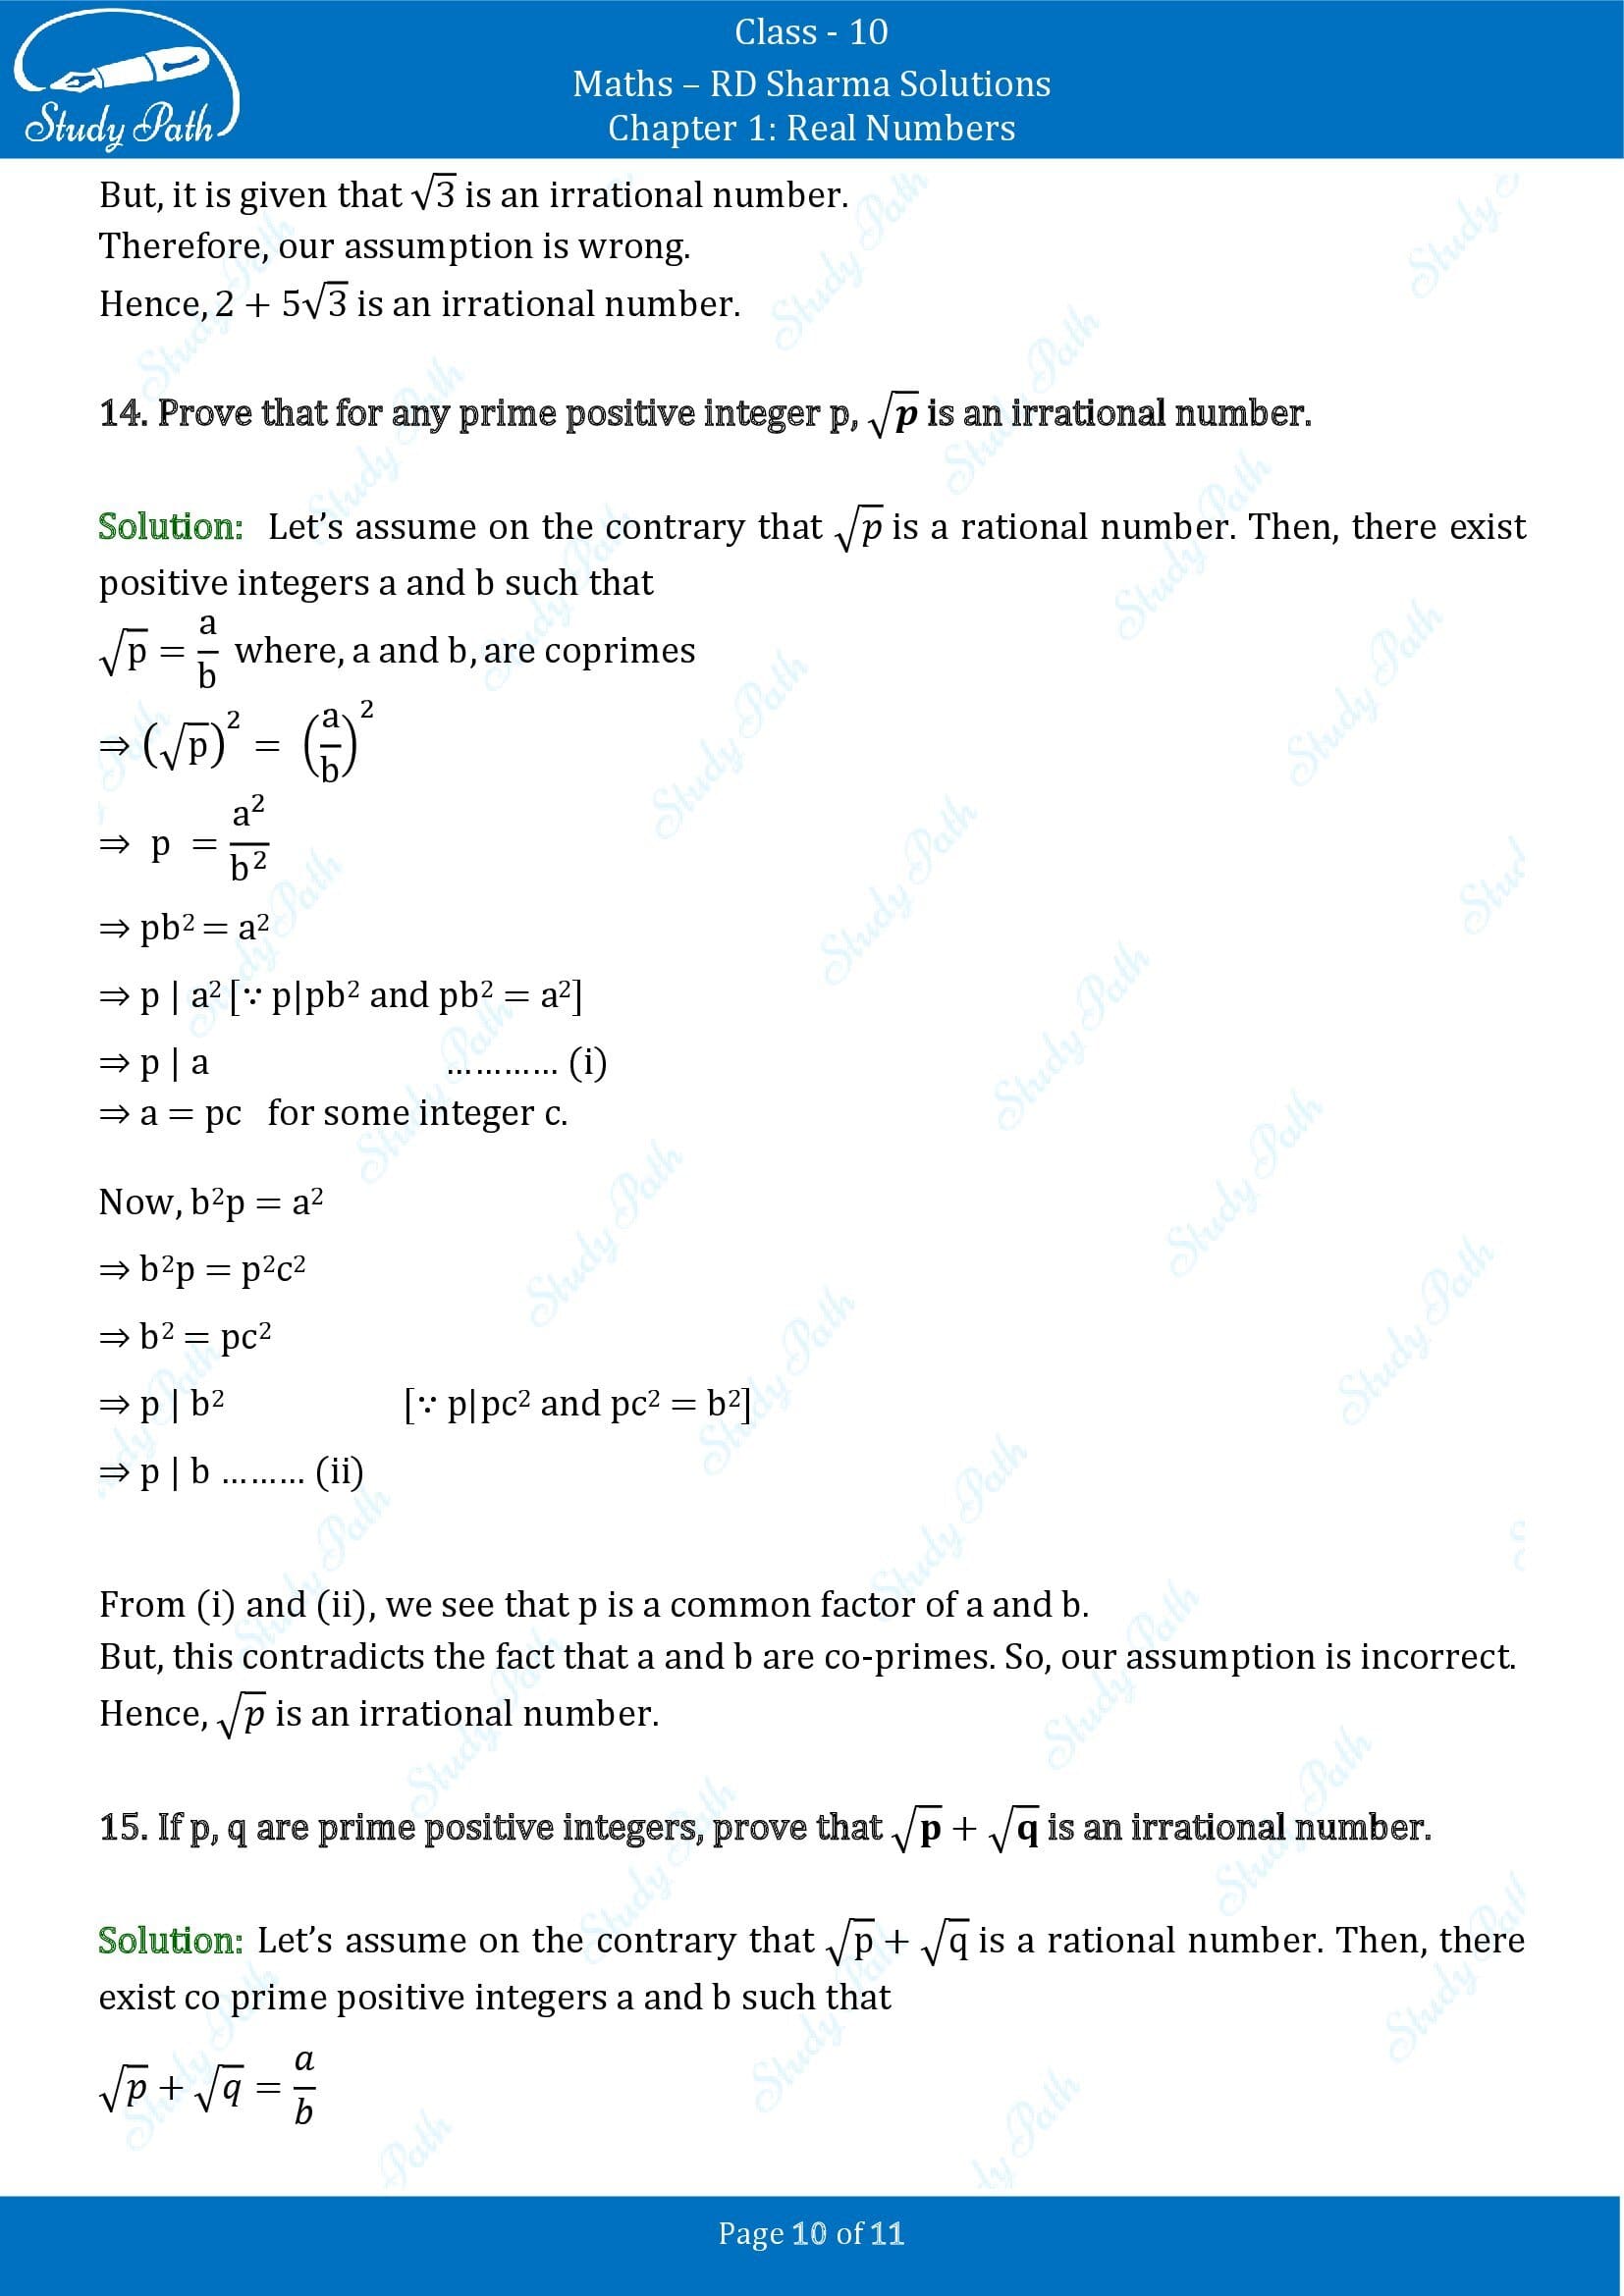 RD Sharma Solutions Class 10 Chapter 1 Real Numbers Exercise 1.5 00010